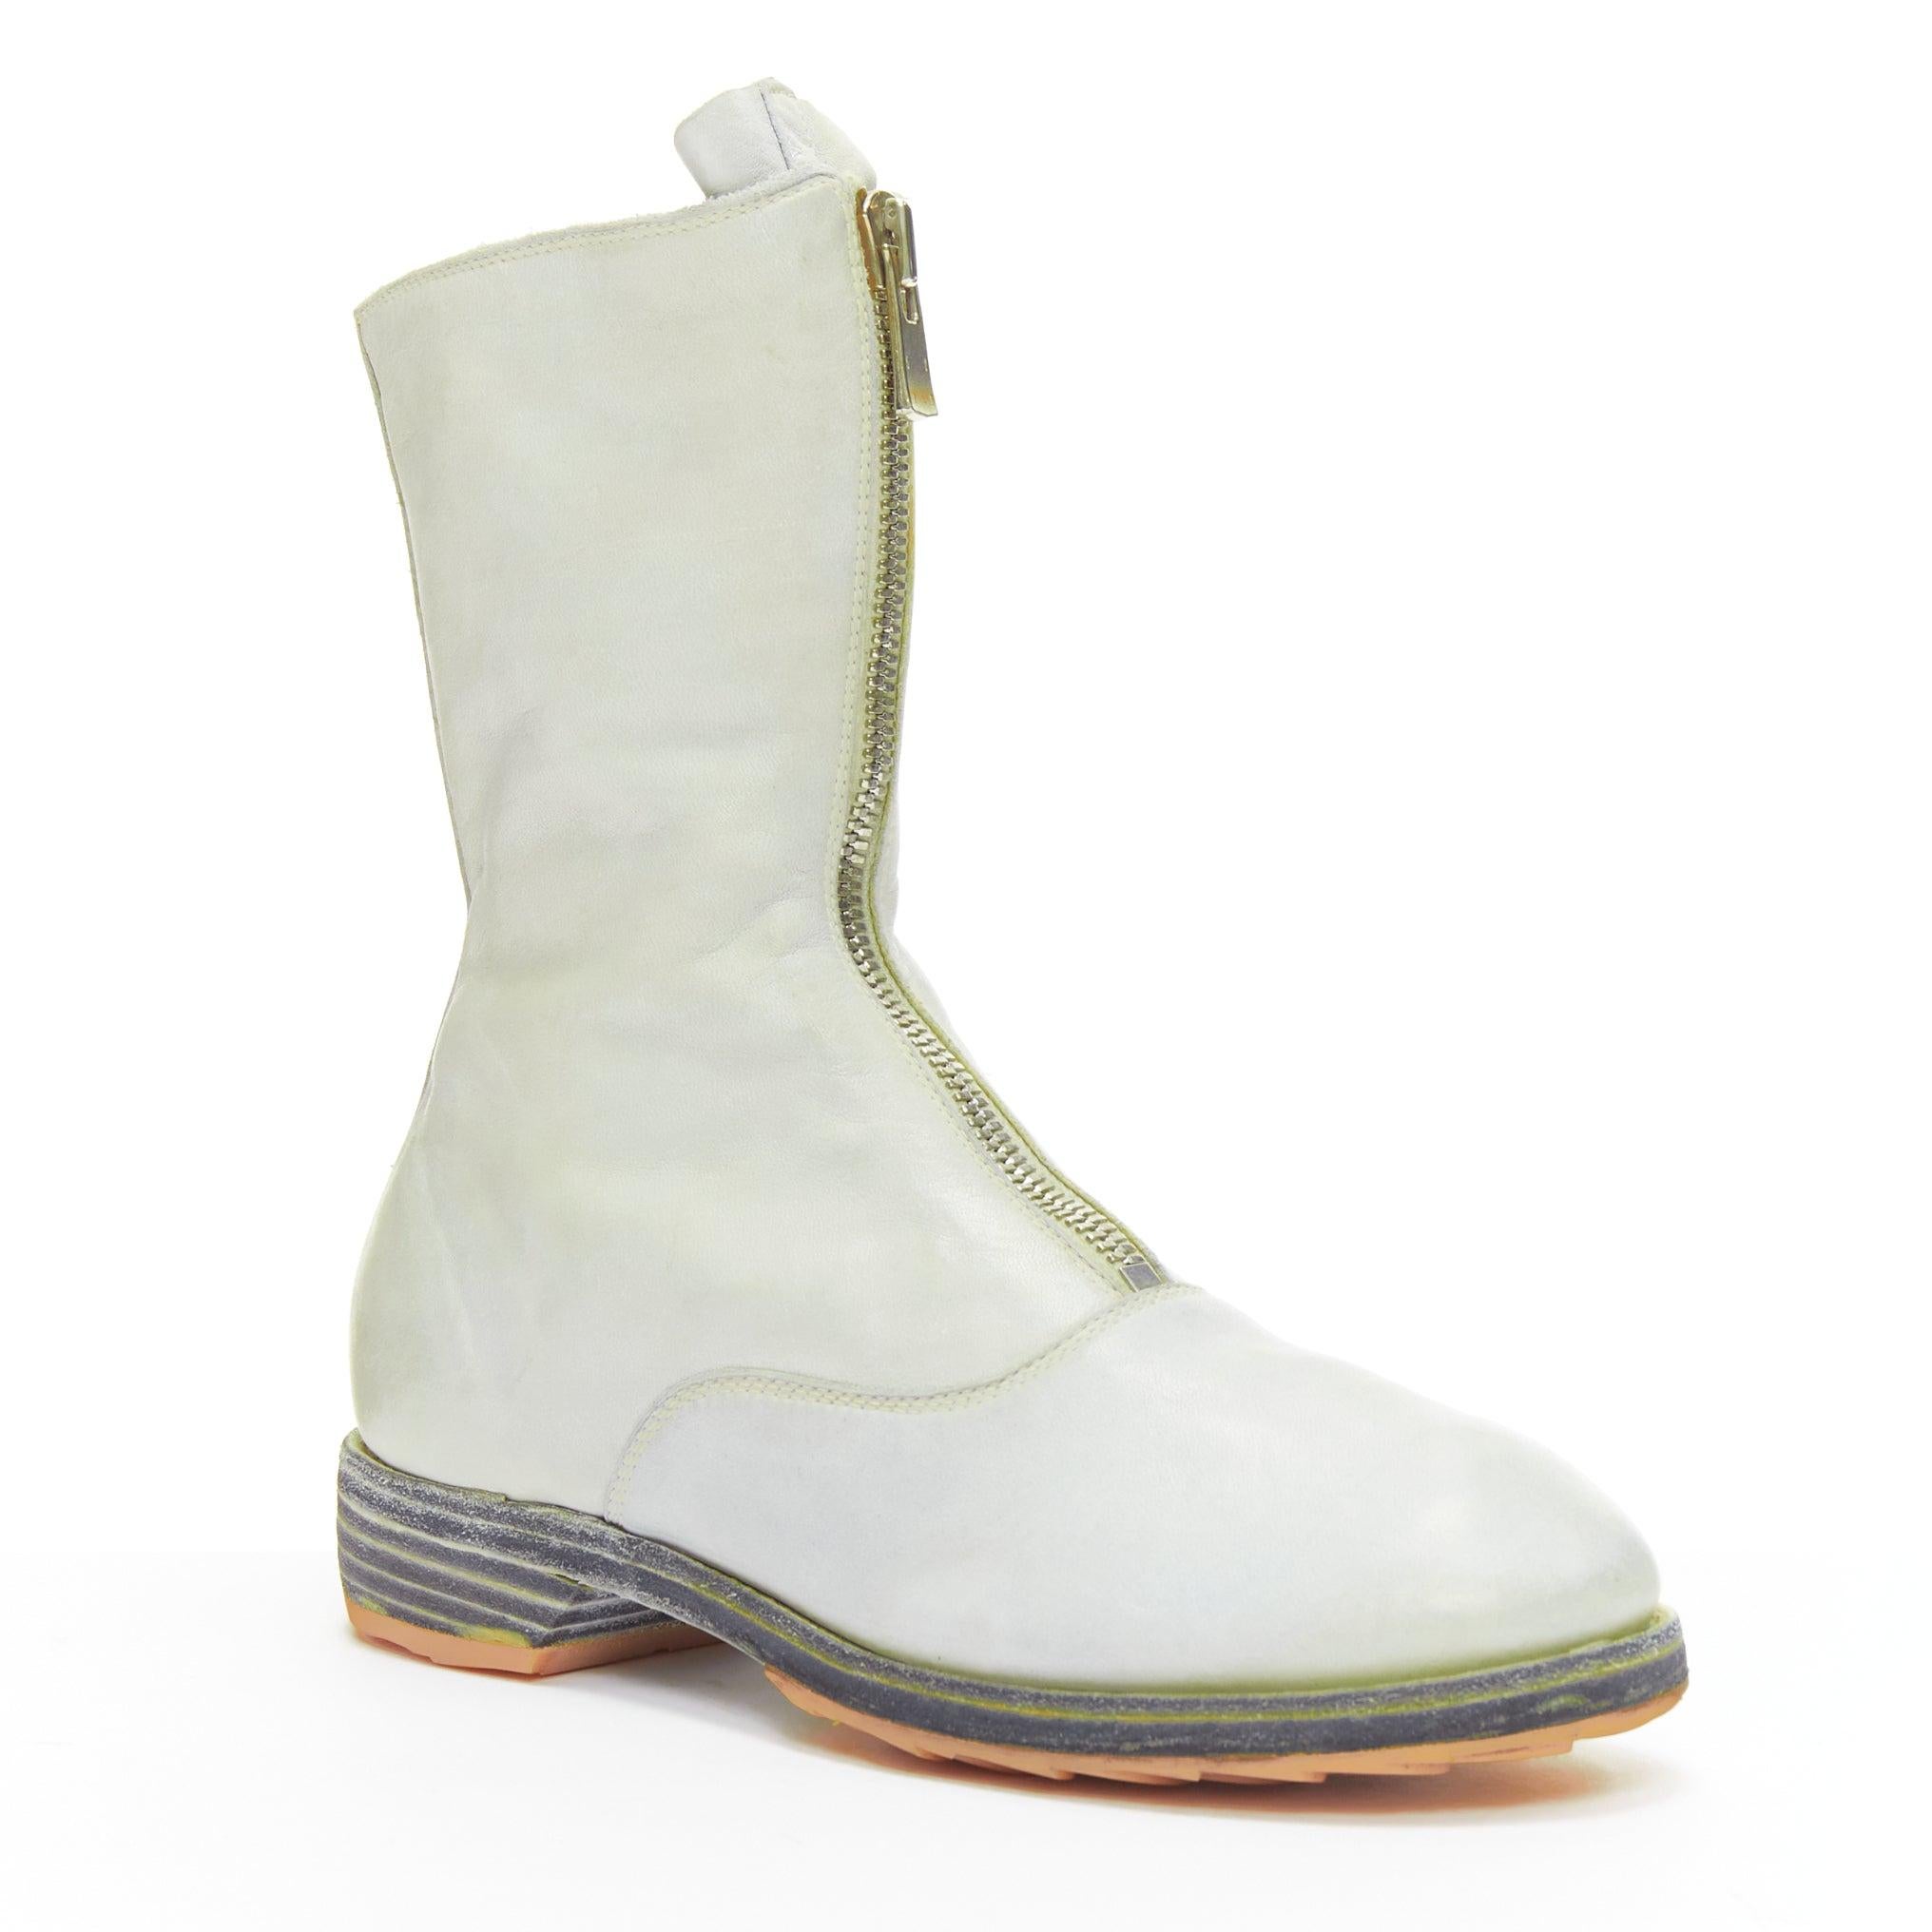 GUIDI light grey tumbled washed soft leather zip front boot EU37
Reference: JACG/A00092
Brand: Guidi
Material: Leather
Color: Grey
Pattern: Solid
Closure: Zip
Extra Details: Soft tumbled washed light grey leather. Zip front closure. Stacked wooden